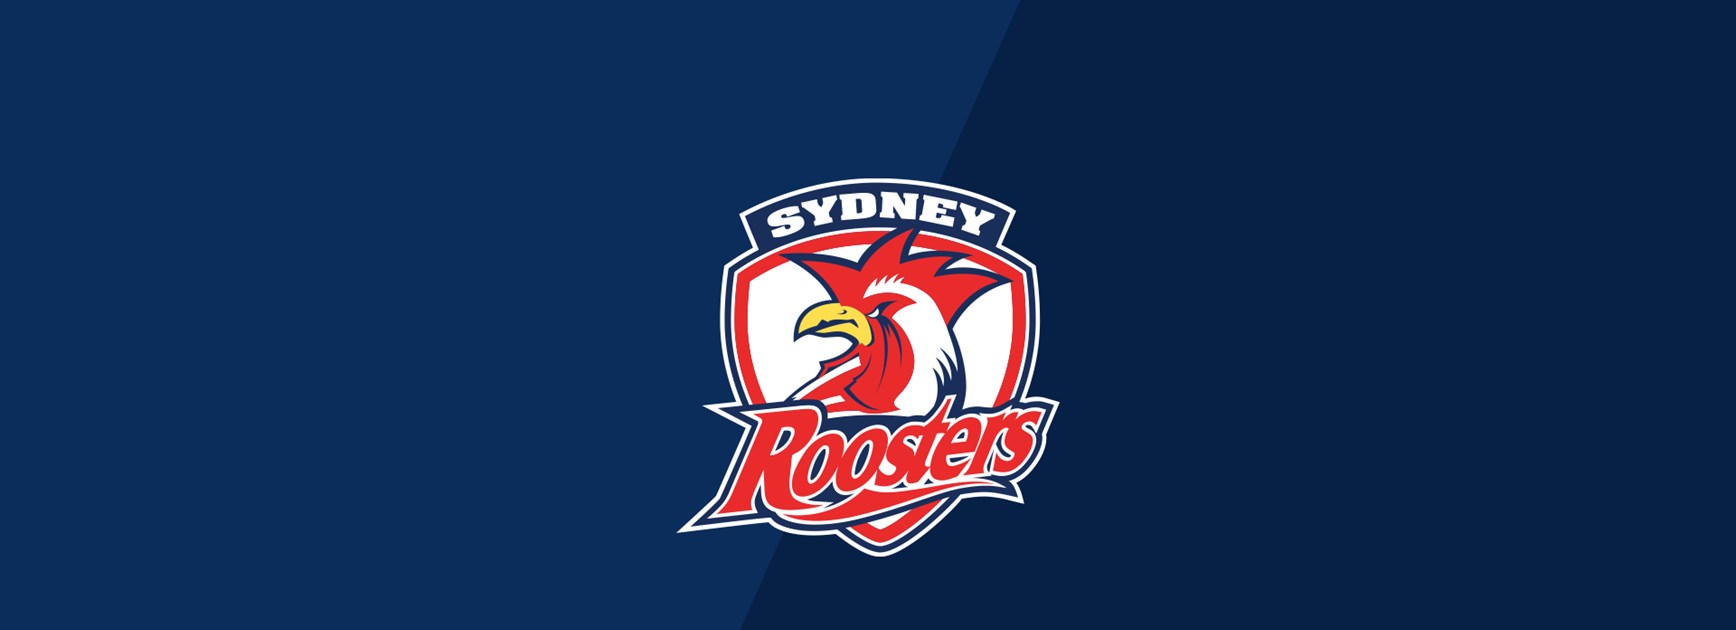 Sydney Roosters Media Update